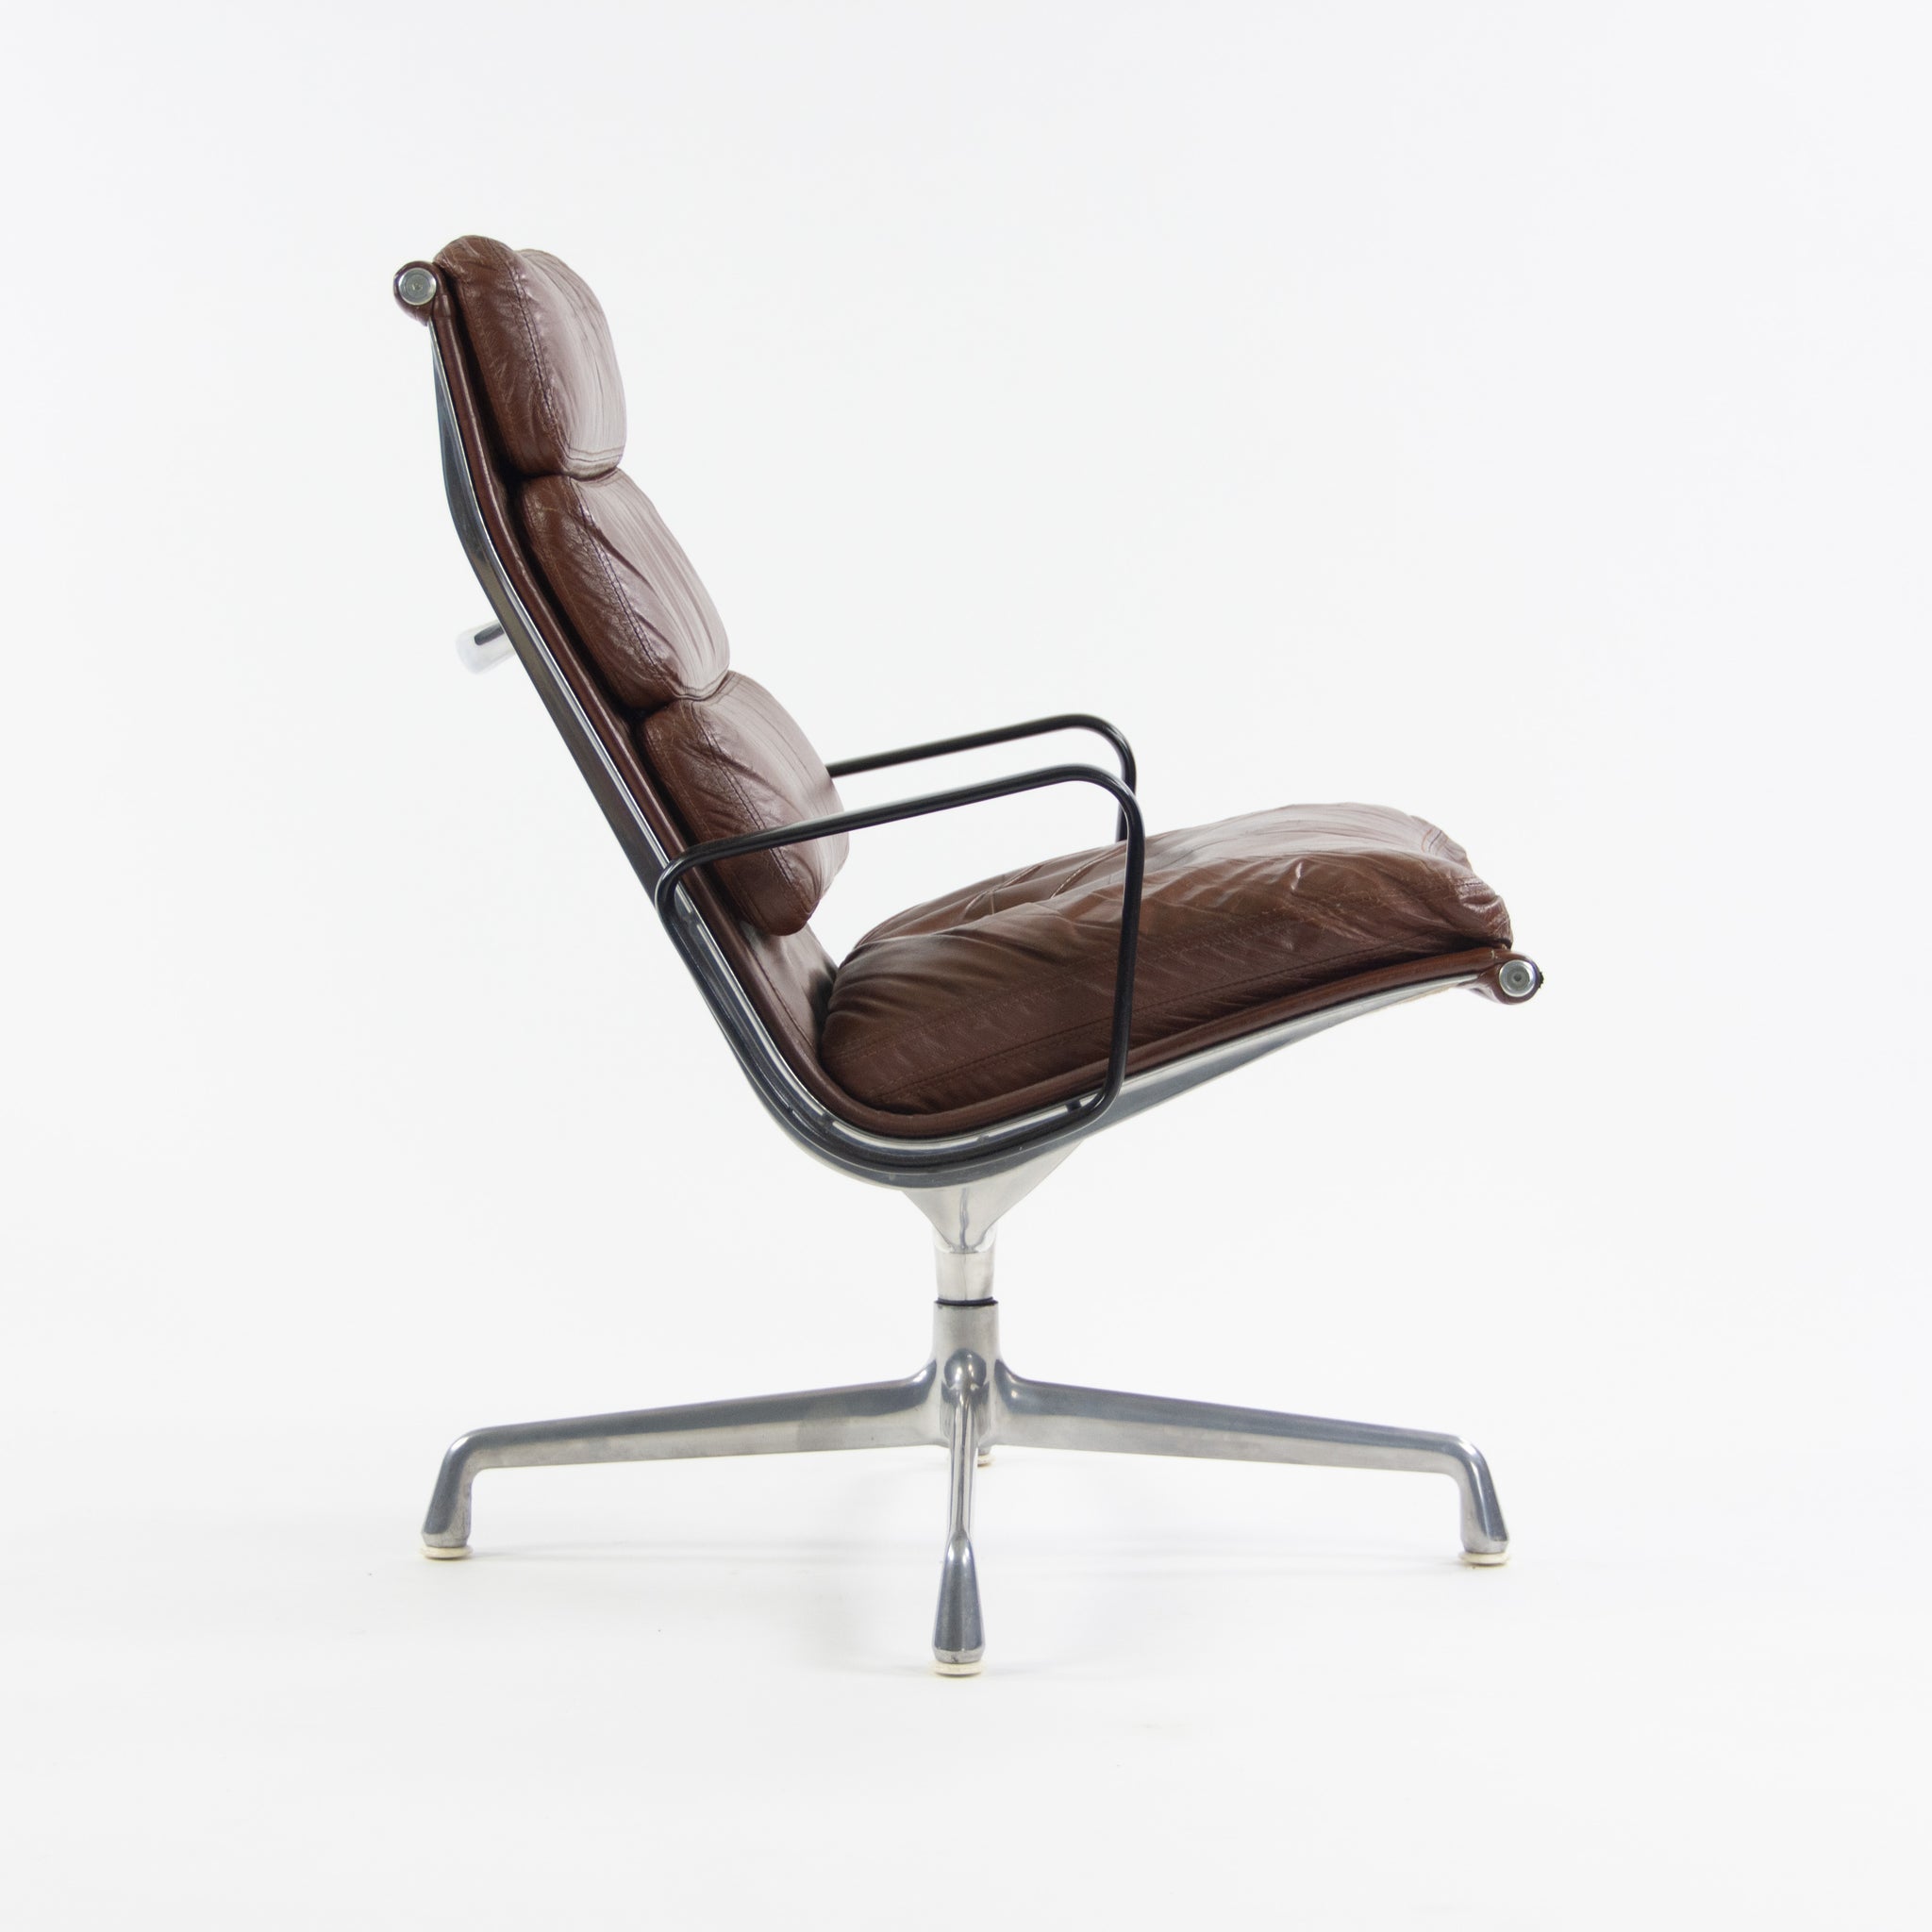 SOLD 1970's Museum Quality Eames Herman Miller Soft Pad Aluminum Lounge Chair Brown